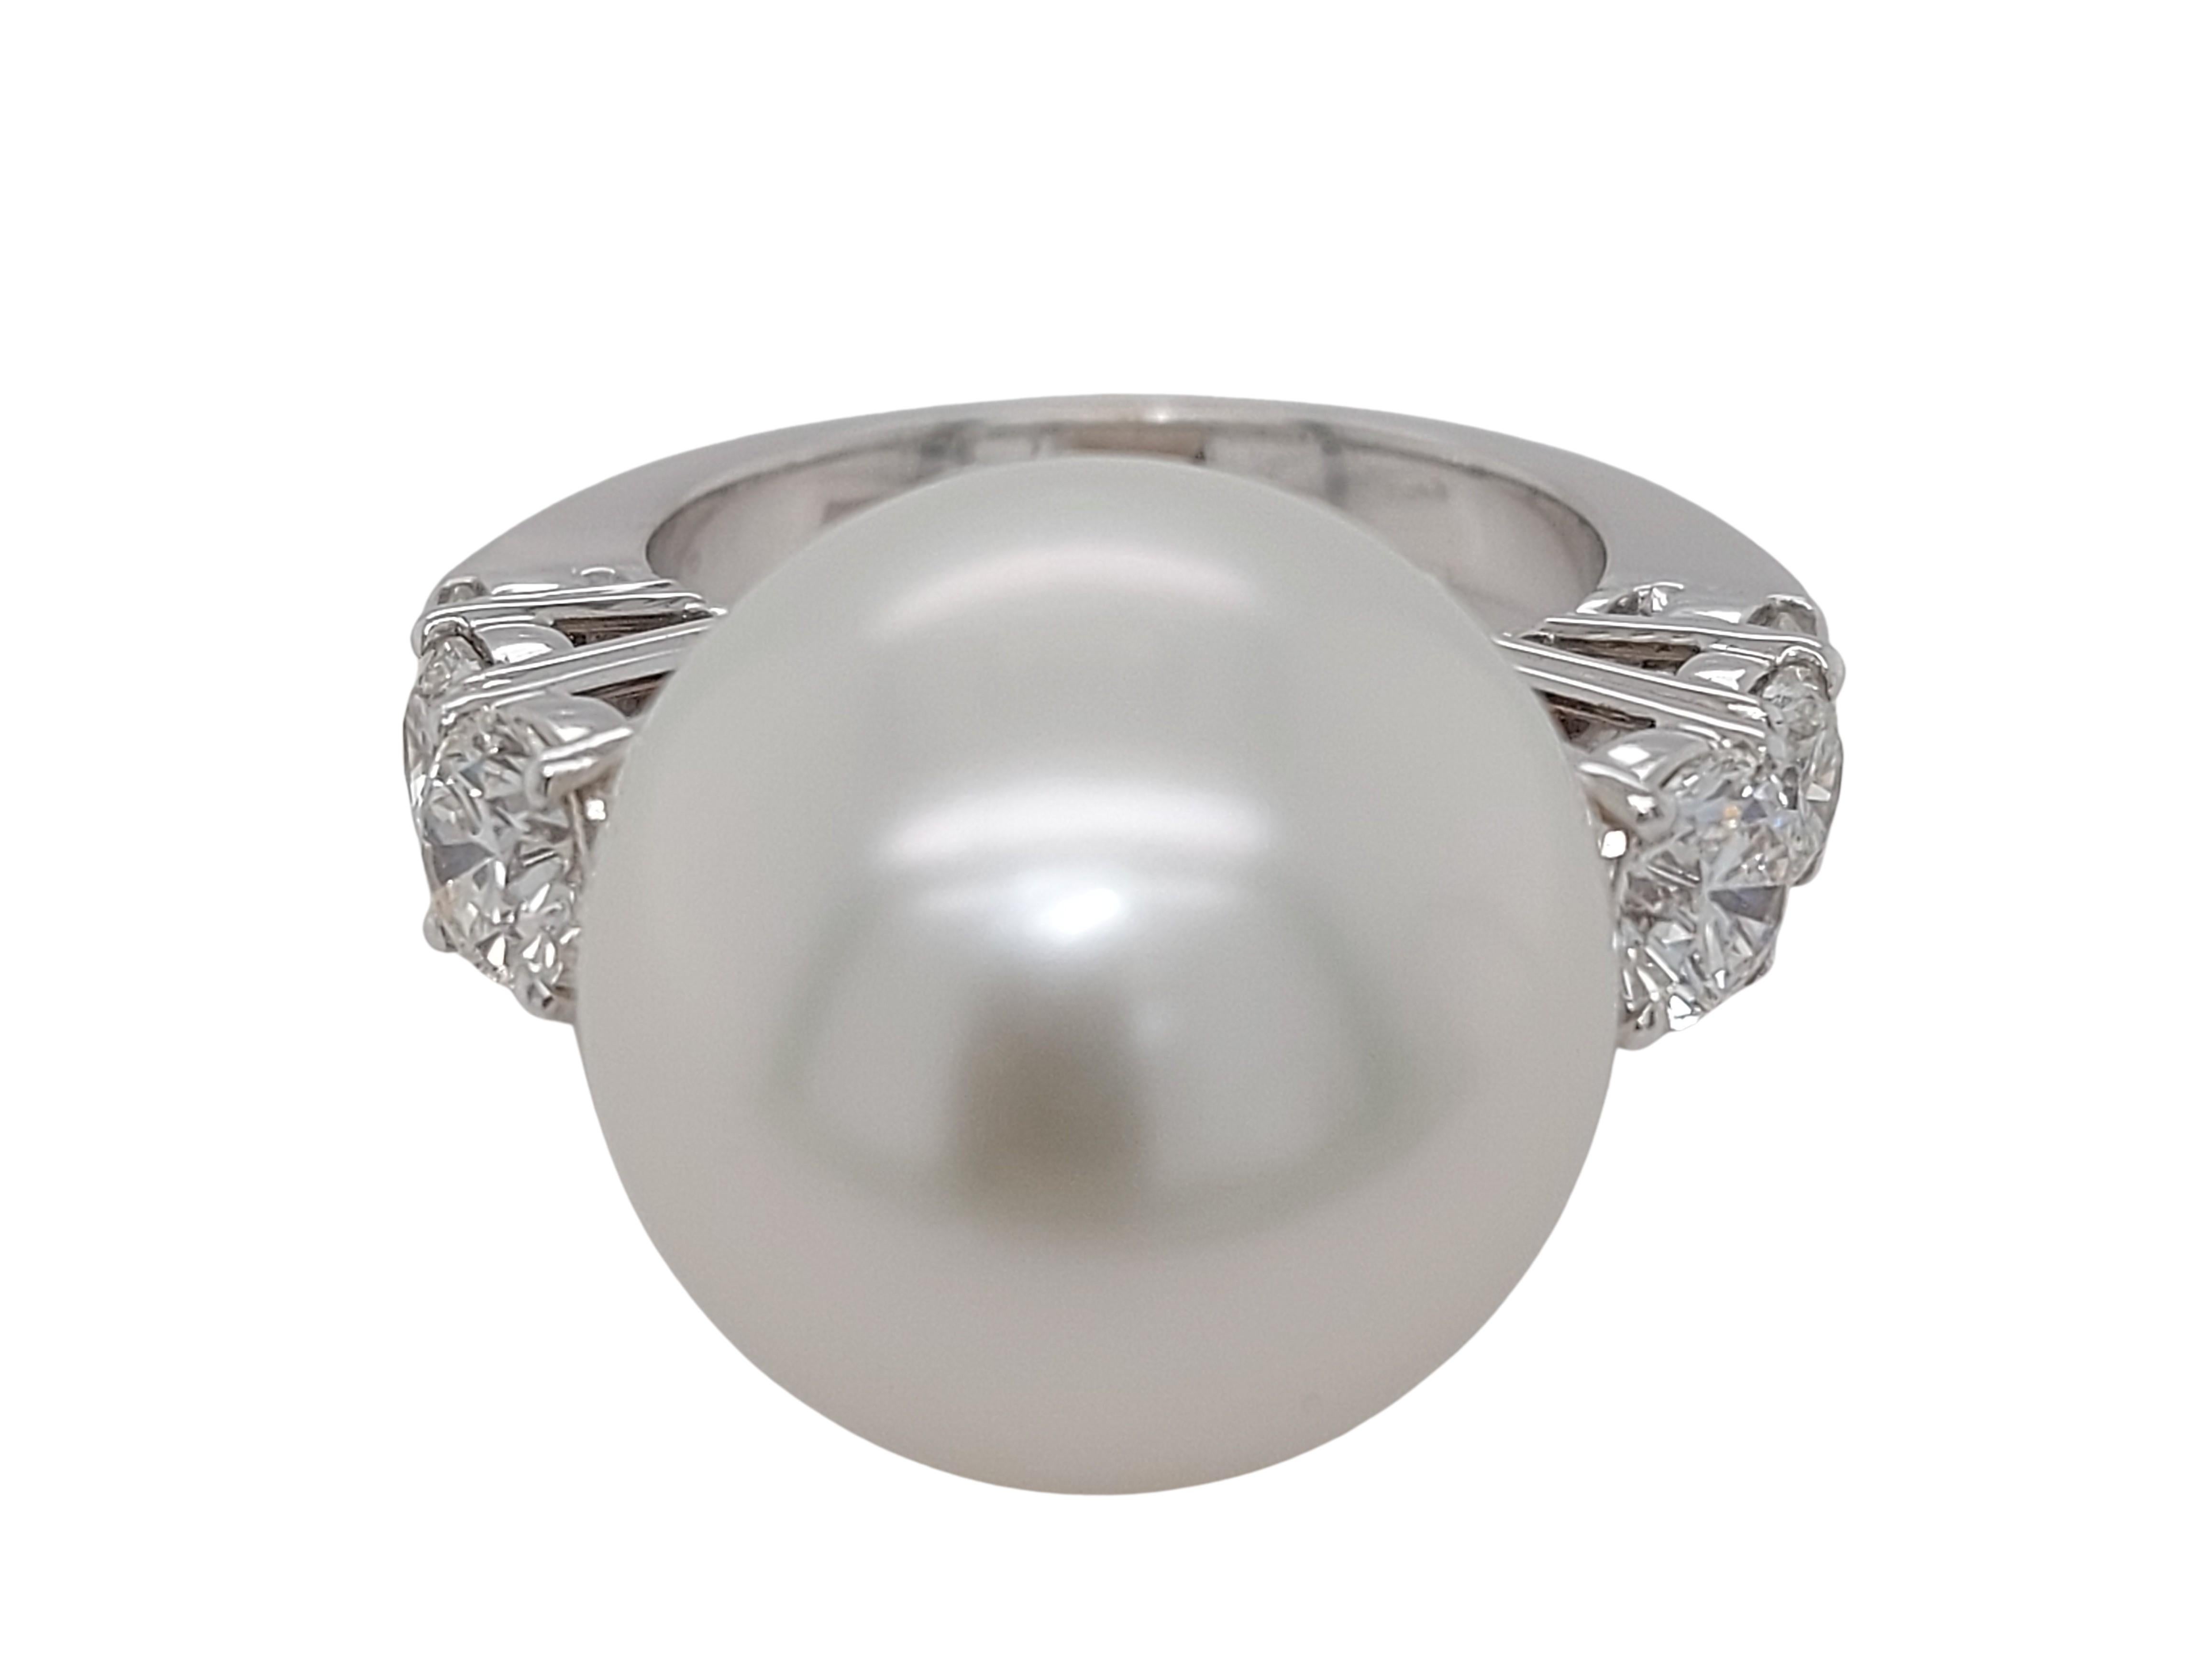 18kt White Gold Ring With 1.64 Carat Diamonds and a Big South Sea Pearl 

A ring who shines royalty !

Diamonds: 1.64 carat brilliant cut diamonds G vs

South Sea Pearl: 15.90 mm

Material: 18kt white gold

Ring size: 53 EU / 6.5 US (ring size can